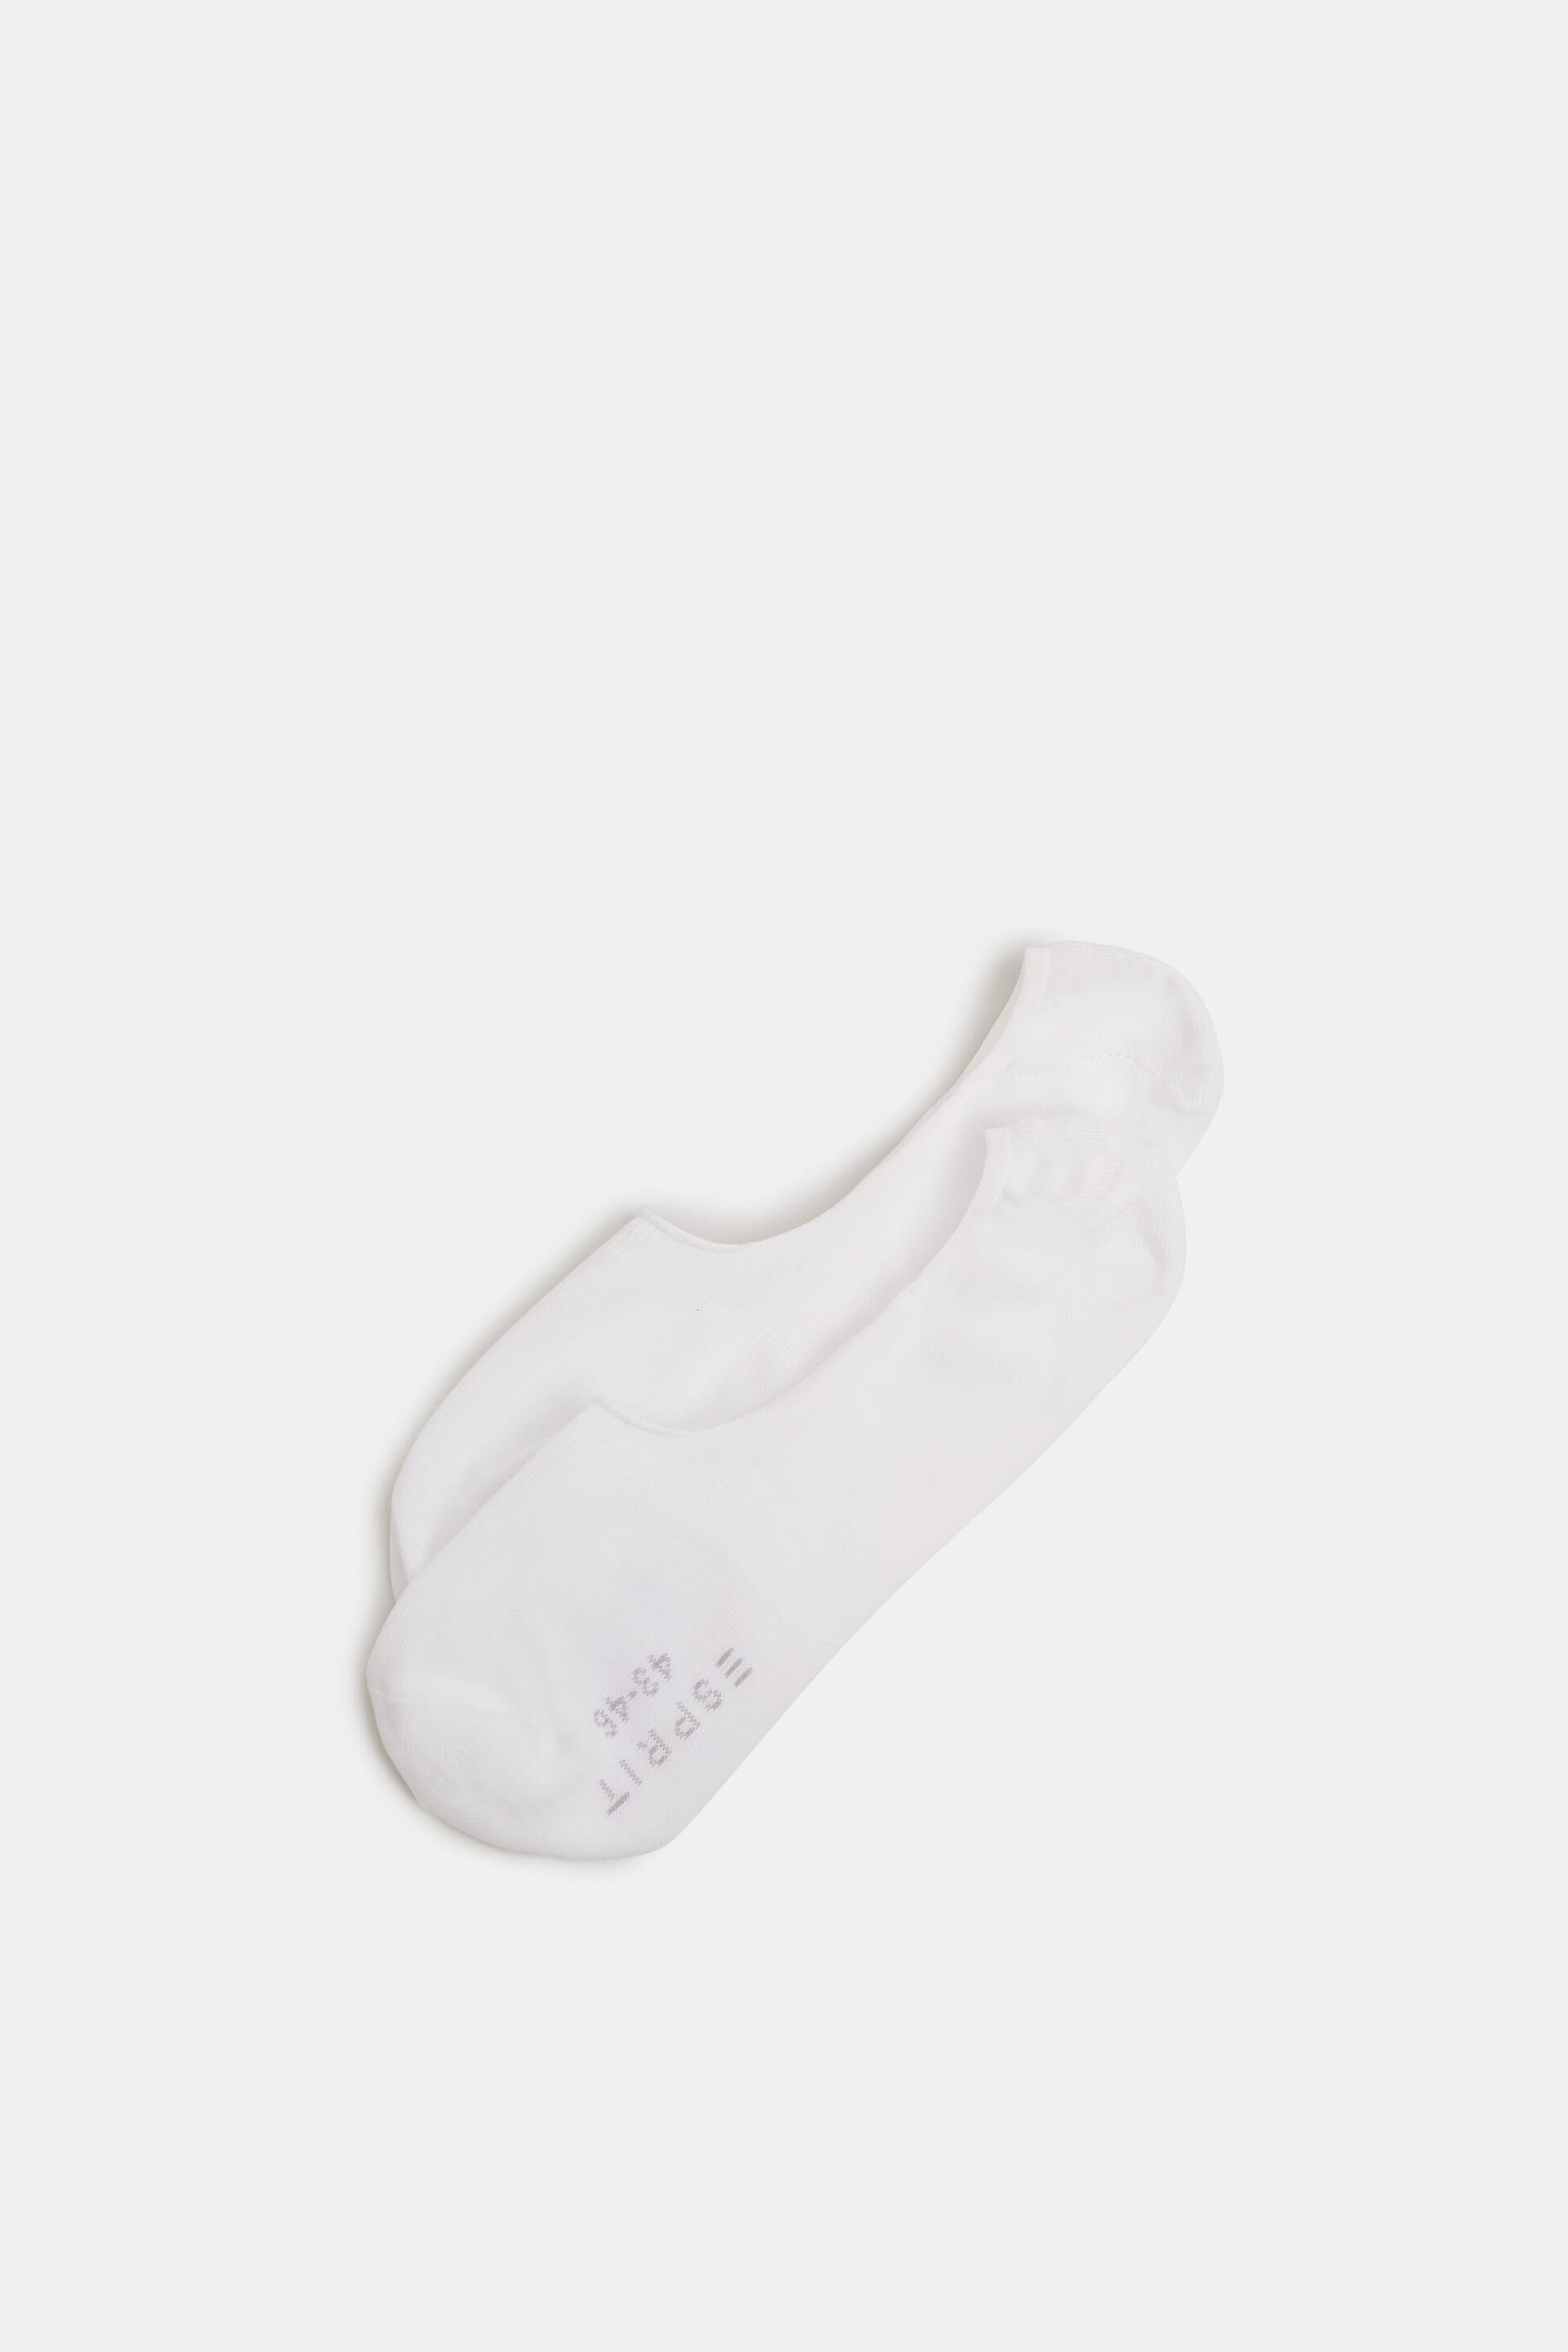 Esprit anti-slip of Double trainer finish with pack socks an